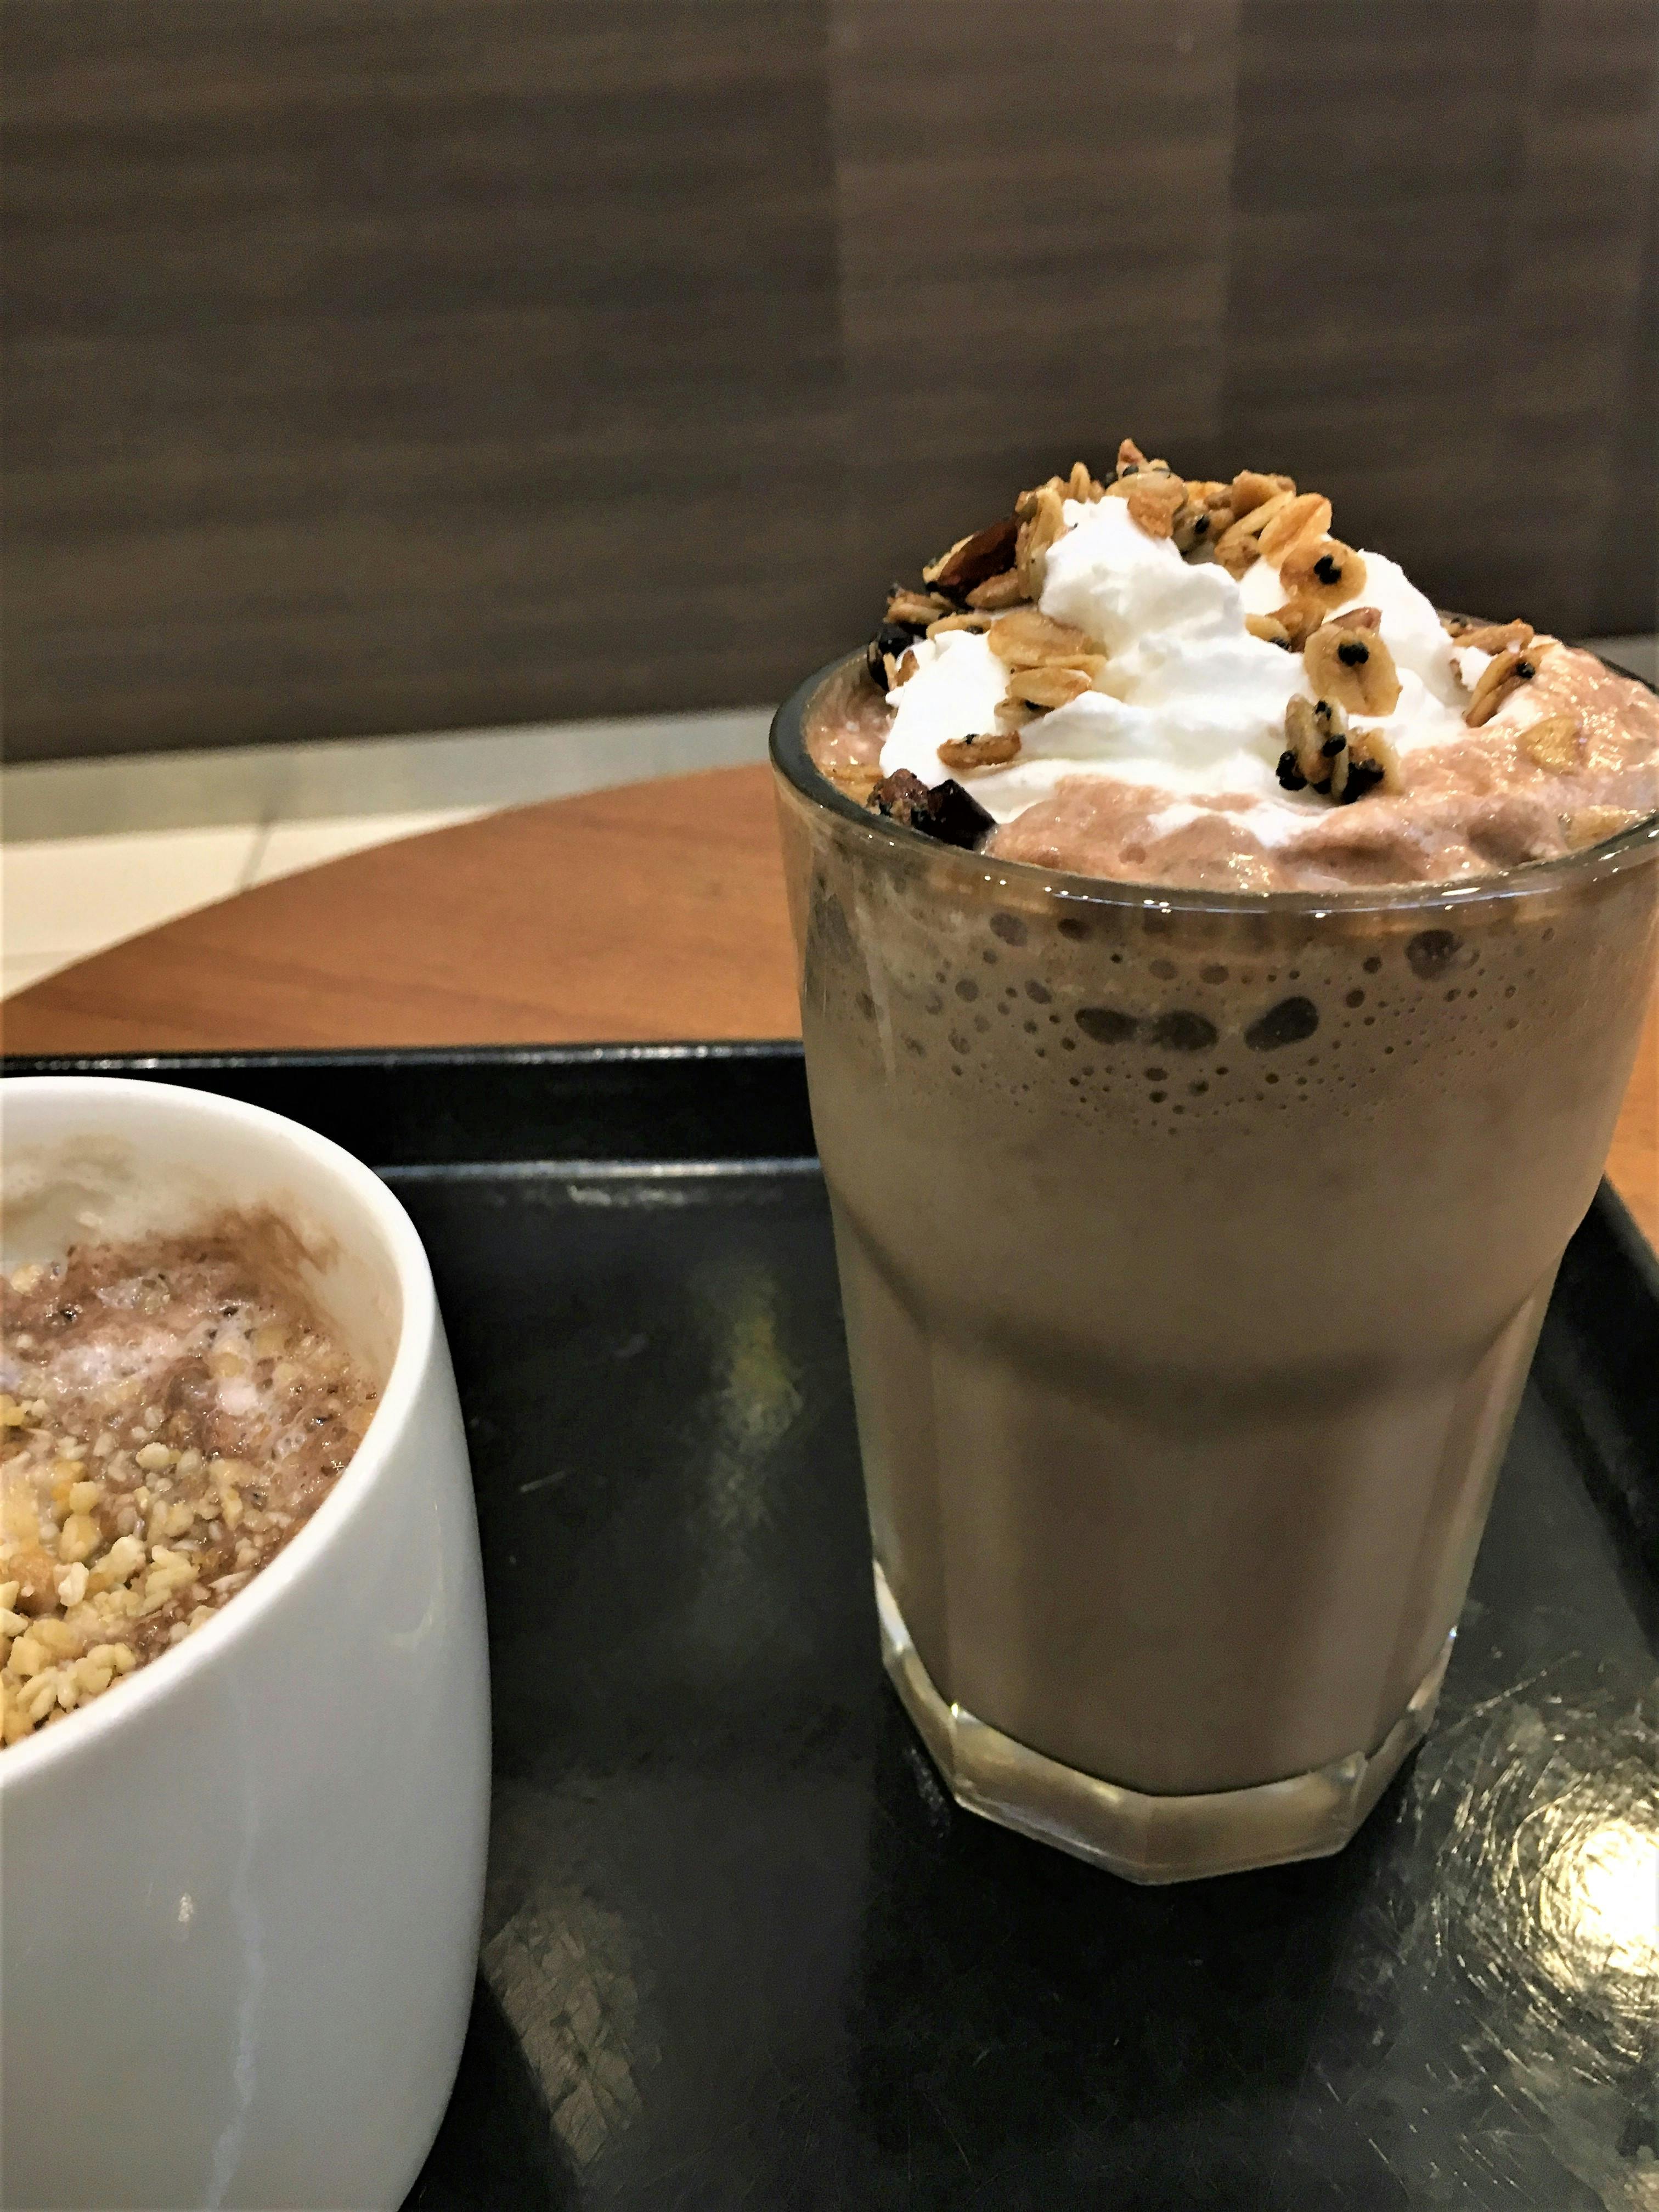 Free stock photo of Hot coffee with nuts and cold chocolate shake